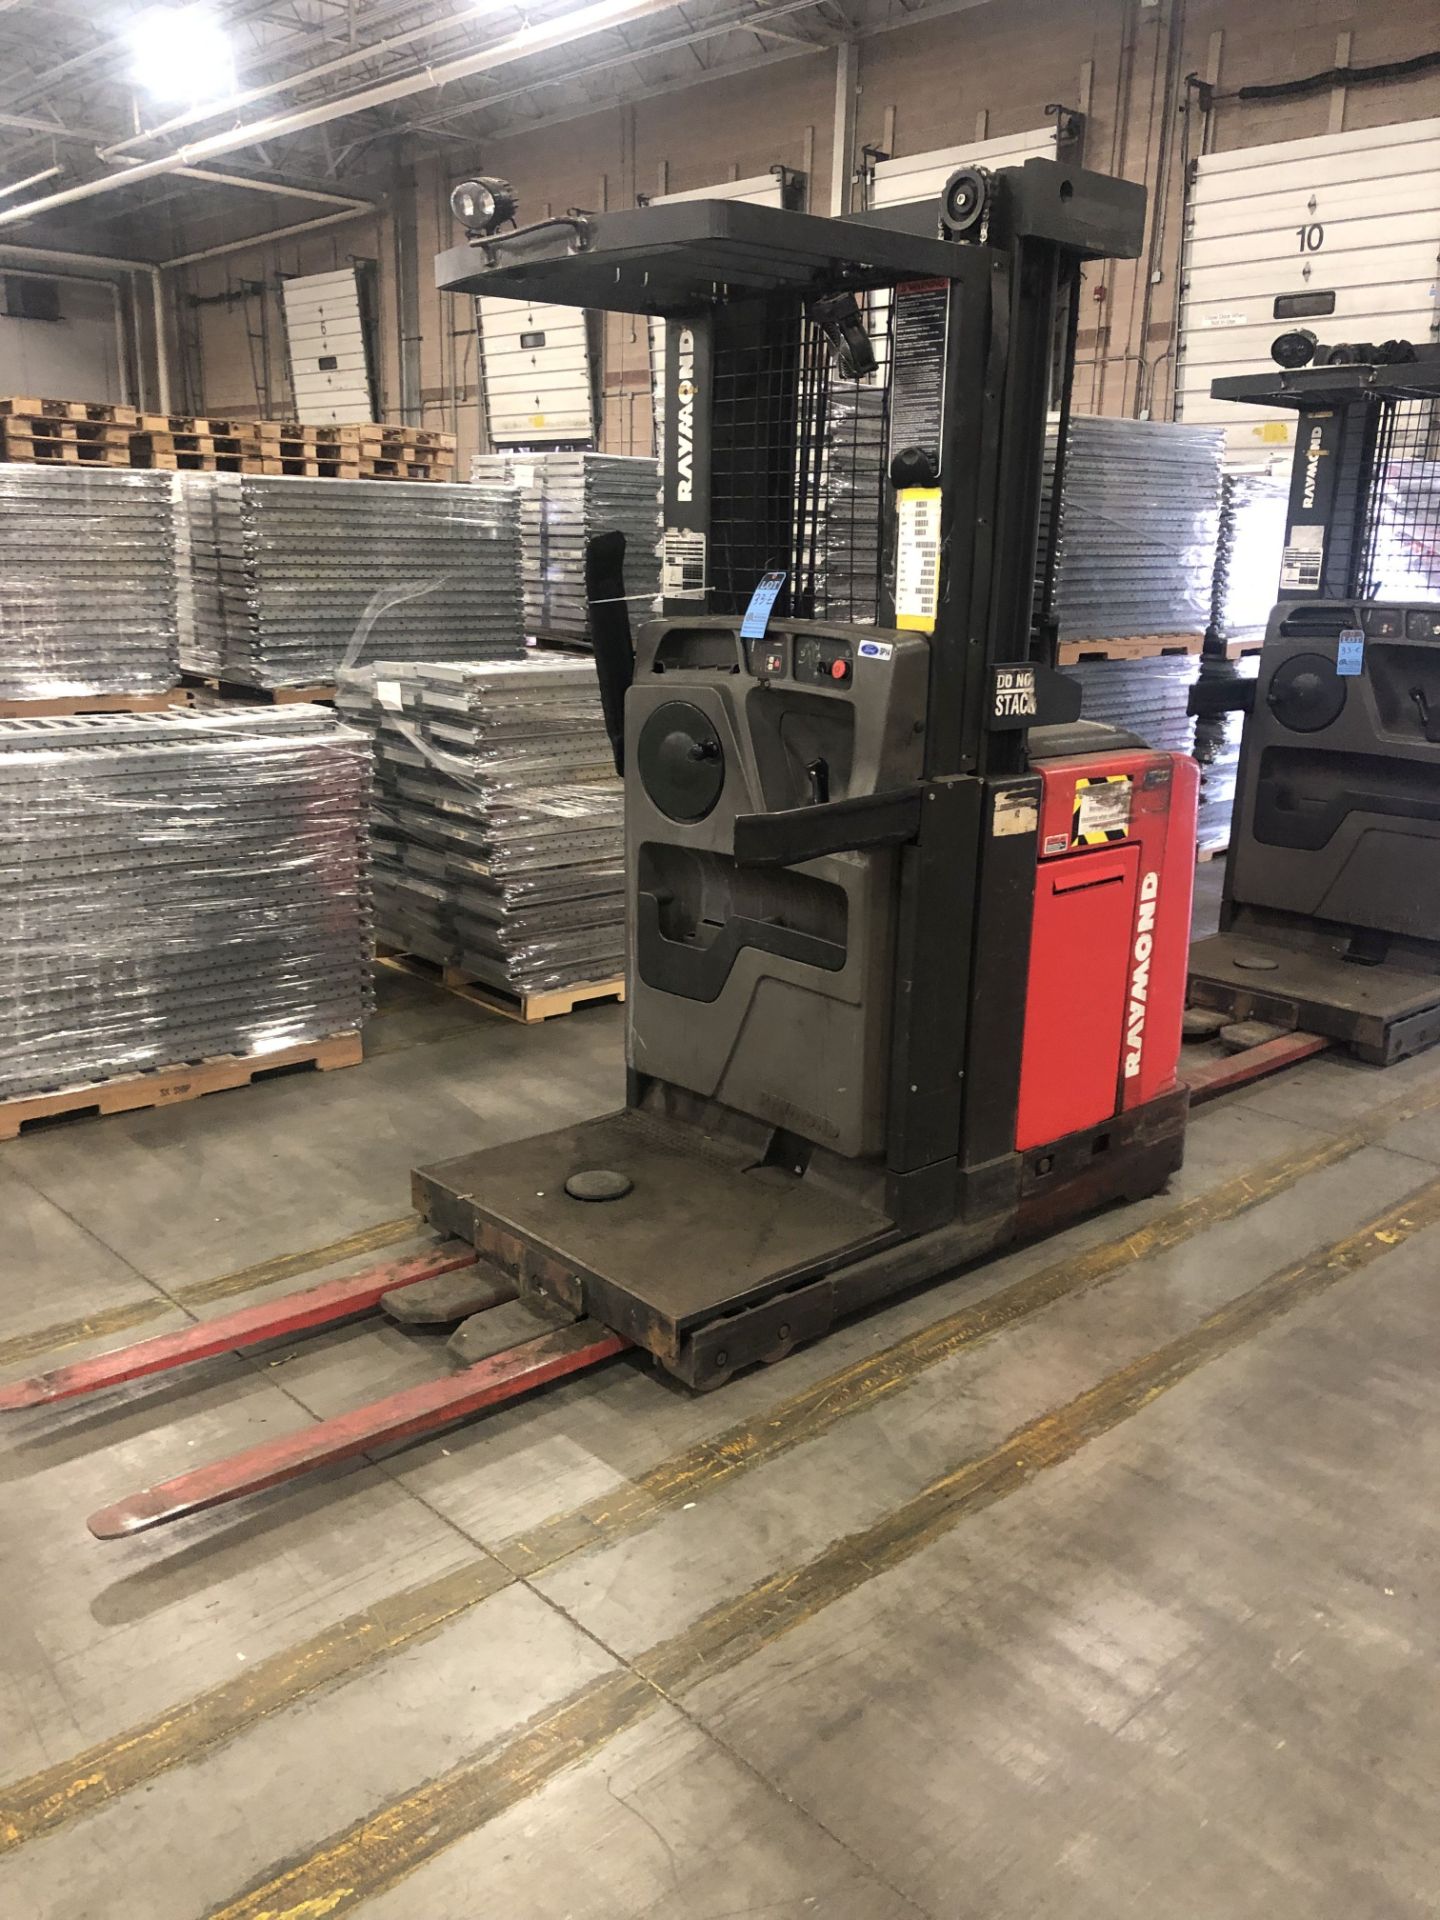 3,000 LB. RAYMOND MODEL 540-OPC30TT STAND UP ELECTRIC ORDER PICKER; S/N EASI-05-AE36153, 204" LIFT - Image 3 of 3